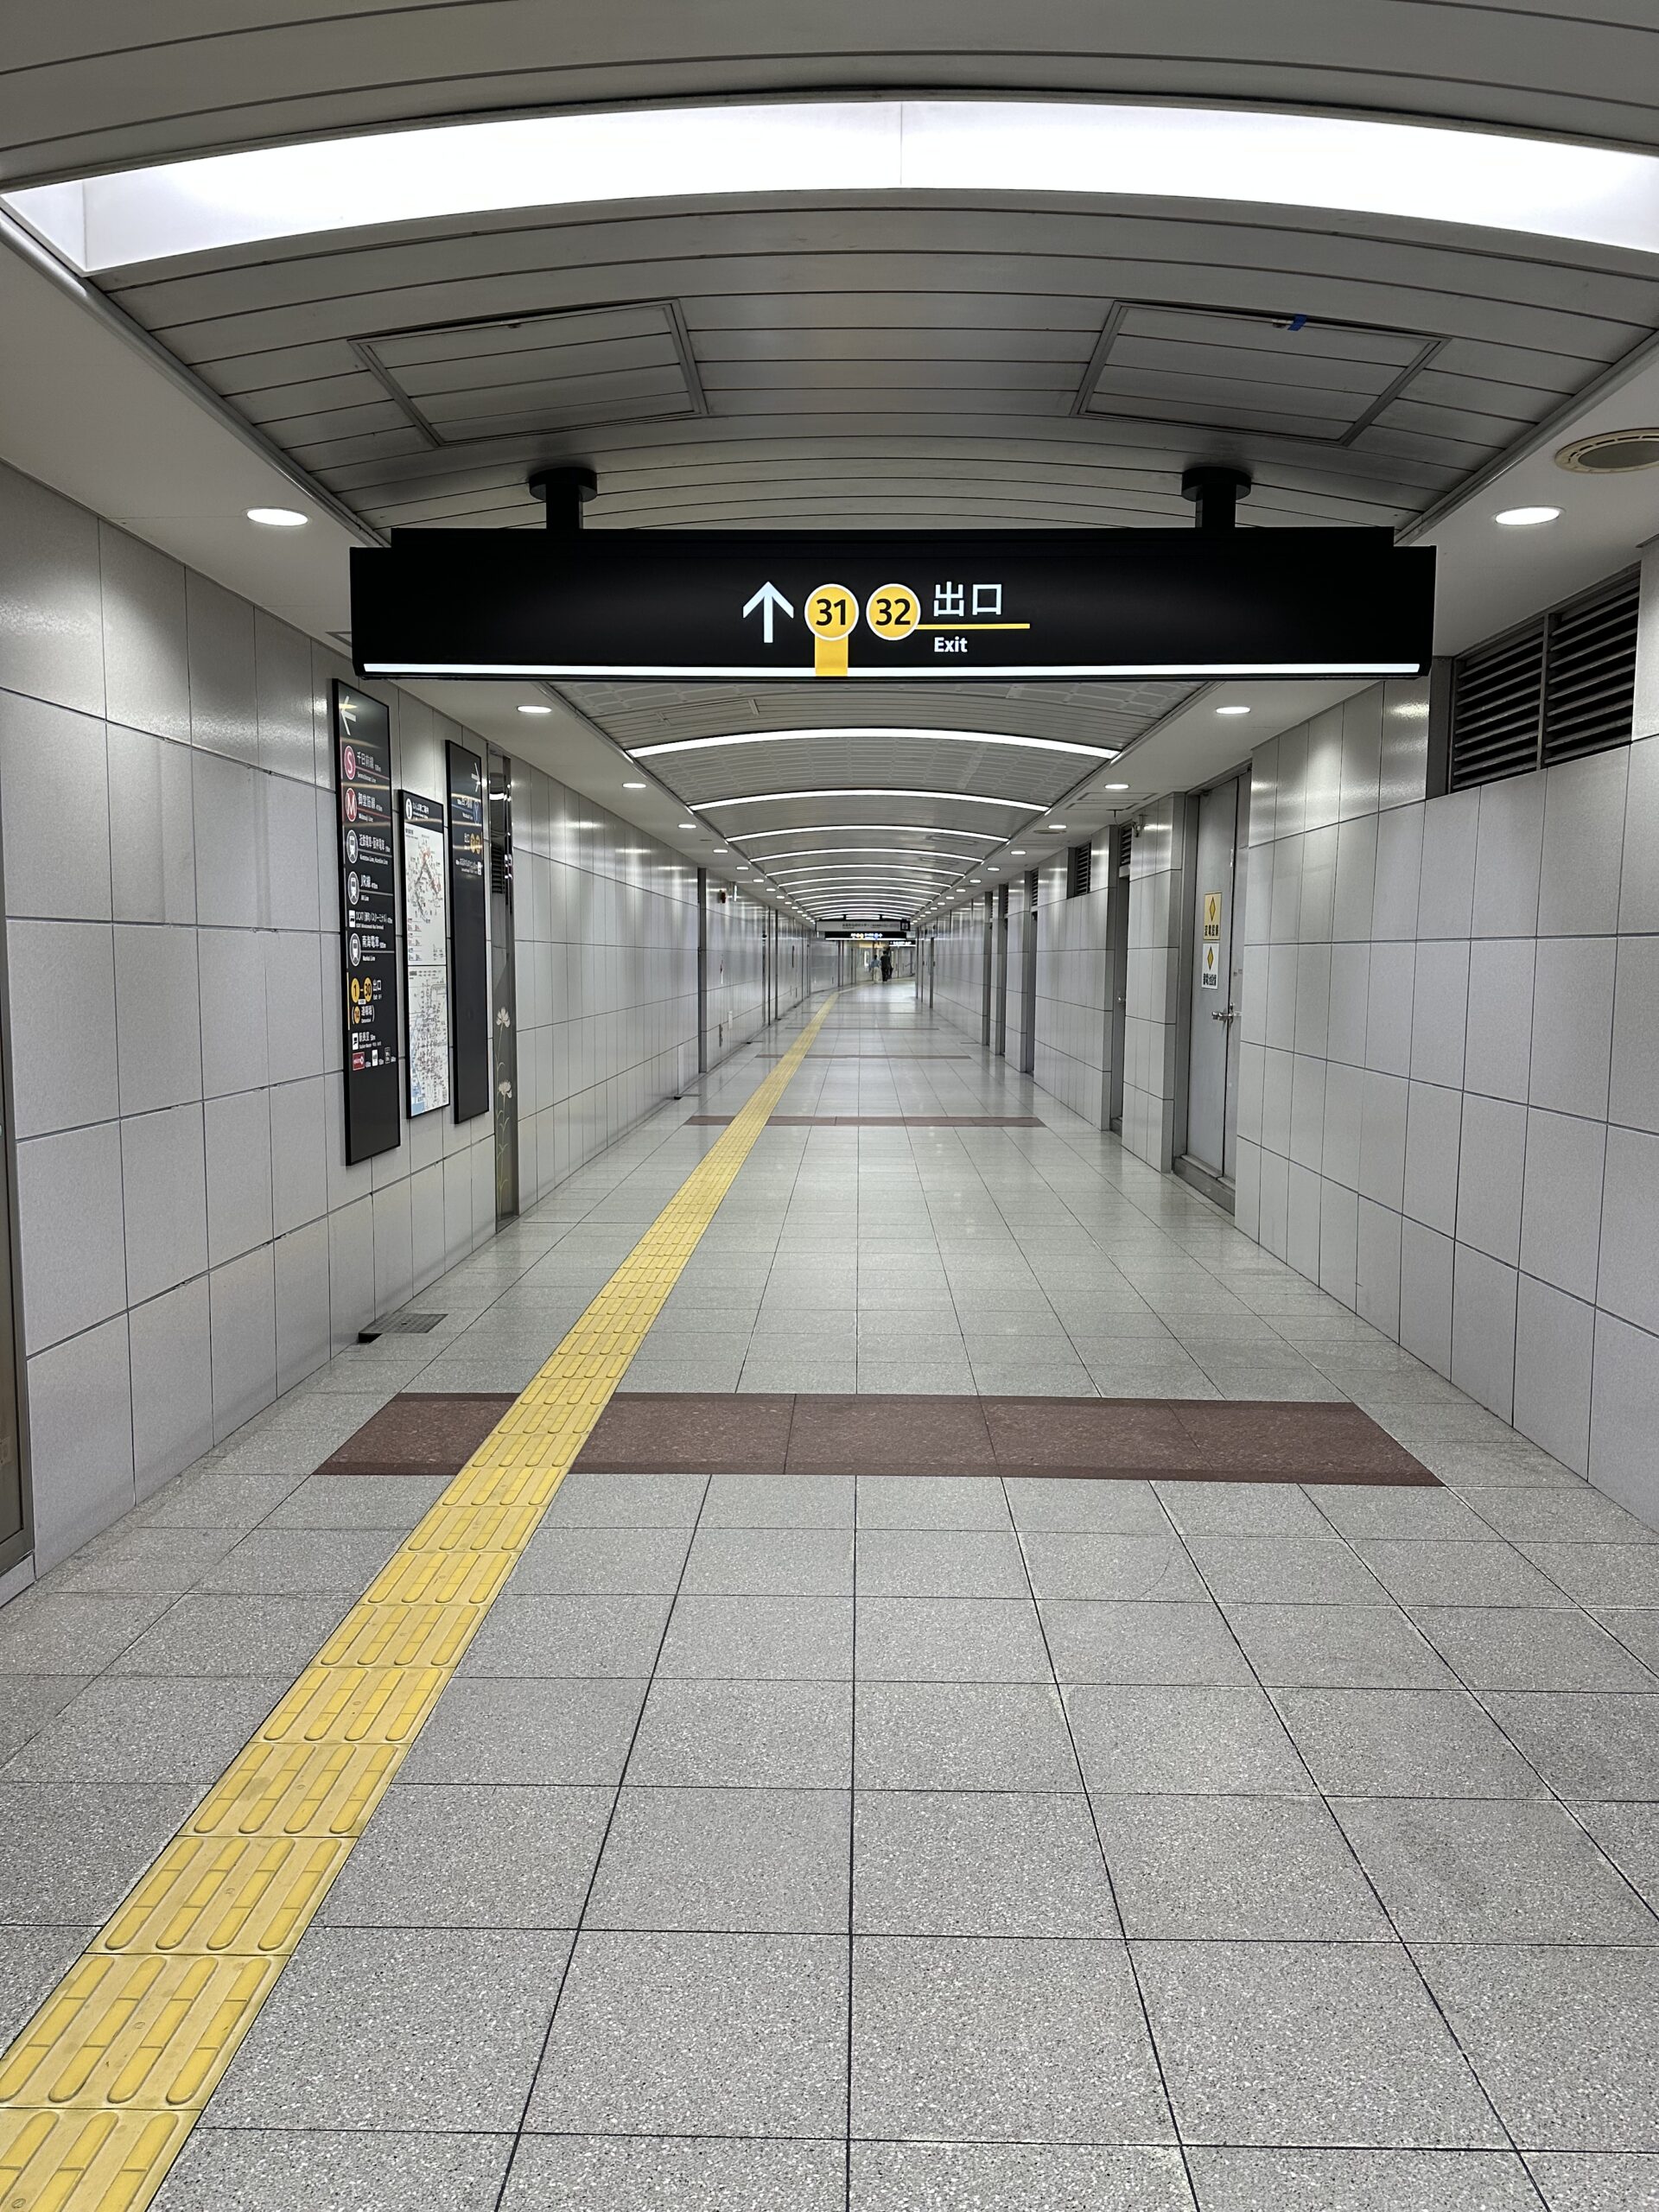 As you can imagine, with 32 exits the metro station can turn into a maze - even with the signs which sometimes simply disappear!